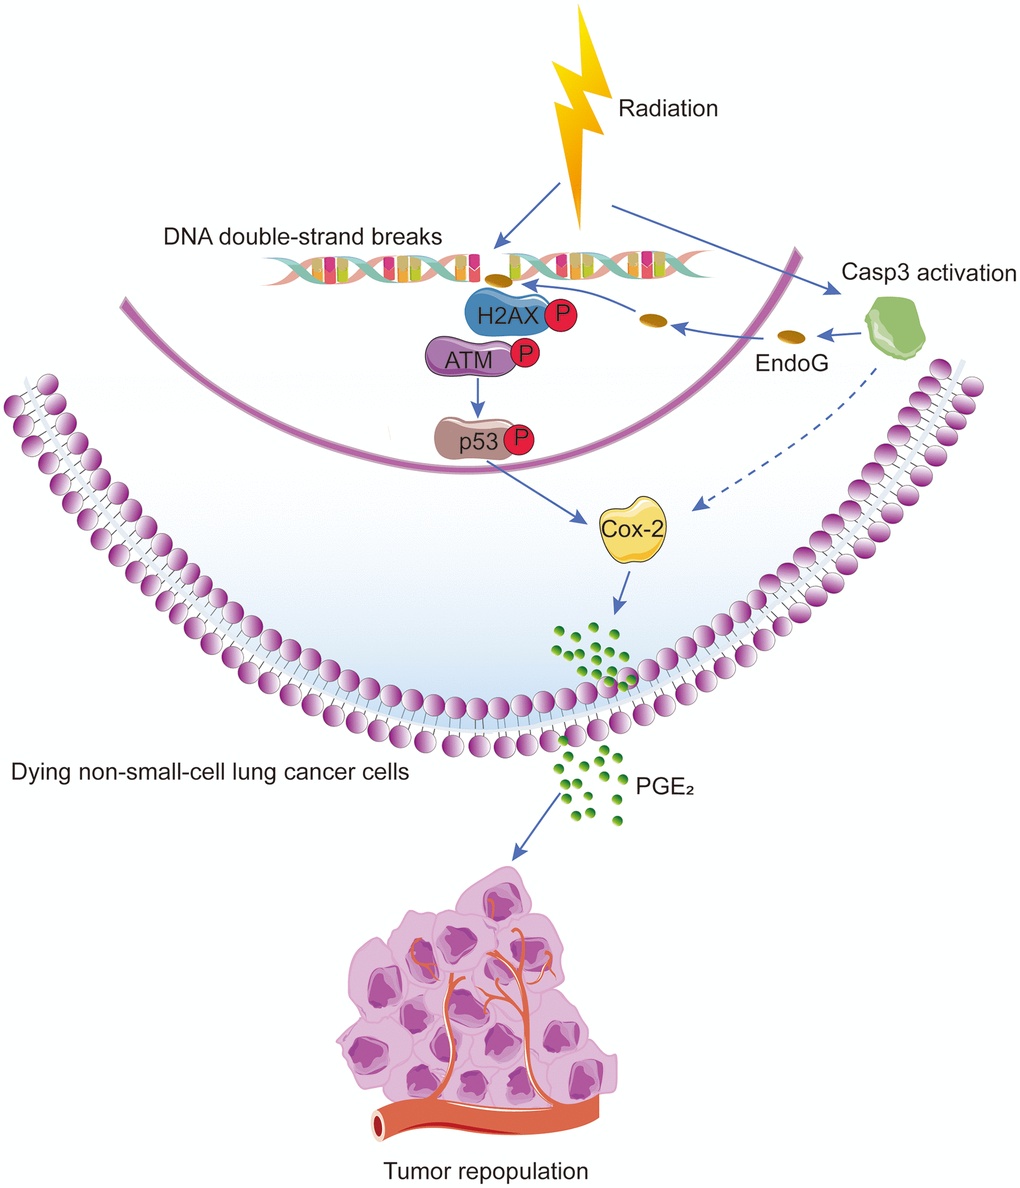 Schematic illustration of the proposed mechanism of radiation-induced tumor repopulation in NSCLC. Radiation-induced DNA double-strand breaks (DSBs) activate the DNA damage response (DDR) and caspase-3. Activated caspase-3 regulates the EndoG nuclear translocation and thus participates in the DDR by regulating ATM/p53 signaling, which activates the Cox-2/PGE2 axis in dying NSCLC cells, consequently enhancing the proliferation of living tumor cells.